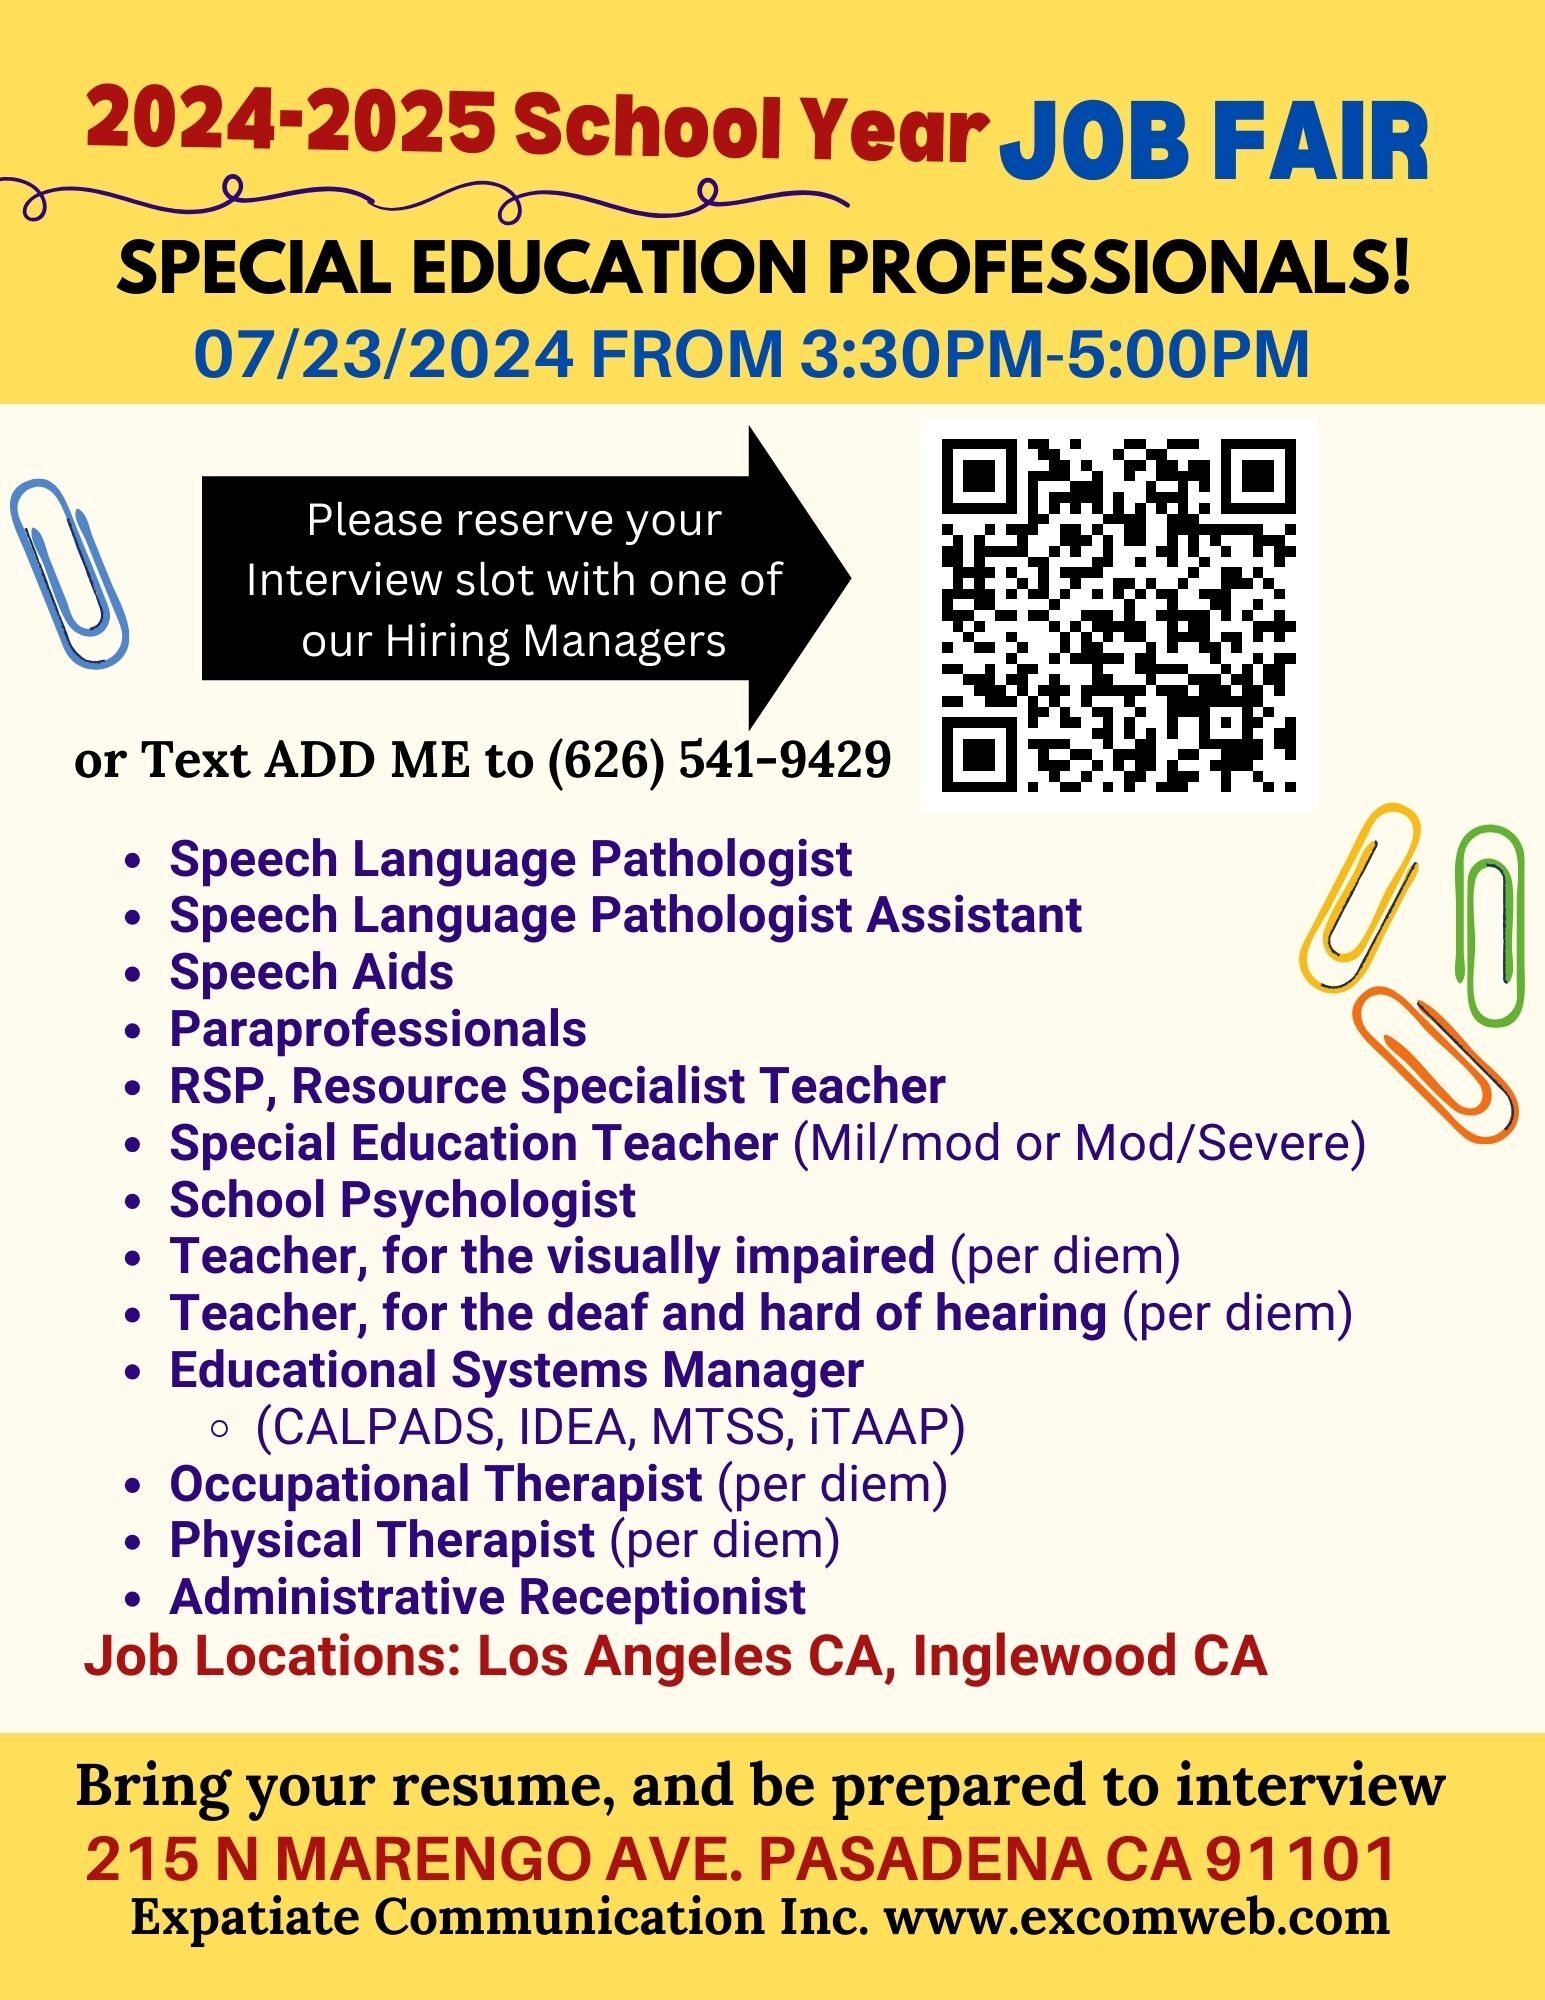 2024-2025 School Year JOB FAIR SPECIAL EDUCATION PROFESSIONALS! 07/23/2024 FROM 3:30PM-5:00PM. Please reserve your Interview slot with one of our Hiring Managers or Text ADD ME to (626) 541-9429.  Hiring: Speech Language Pathologist, Speech Language Pathologist Assistant, Speech Aids, Paraprofessionals, RSP (Resource Specialist Teacher), Special Education Teacher (Mil/mod or Mod/Severe), School Psychologist, Teacher, for the visually impaired (per diem), Teacher, for the deaf and hard of hearing (per diem), Educational Systems Manager (CALPADS, IDEA, MTSS, ITAAP), Occupational Therapist (per diem), Physical Therapist (per diem), Administrative Receptionist. Job Locations: Los Angeles CA, Inglewood CA. Bring your resume, and be prepared to interview. 215 N MARENGO AVE. PASADENA CA 91101. Expatiate Communications Inc. www.excomweb.com